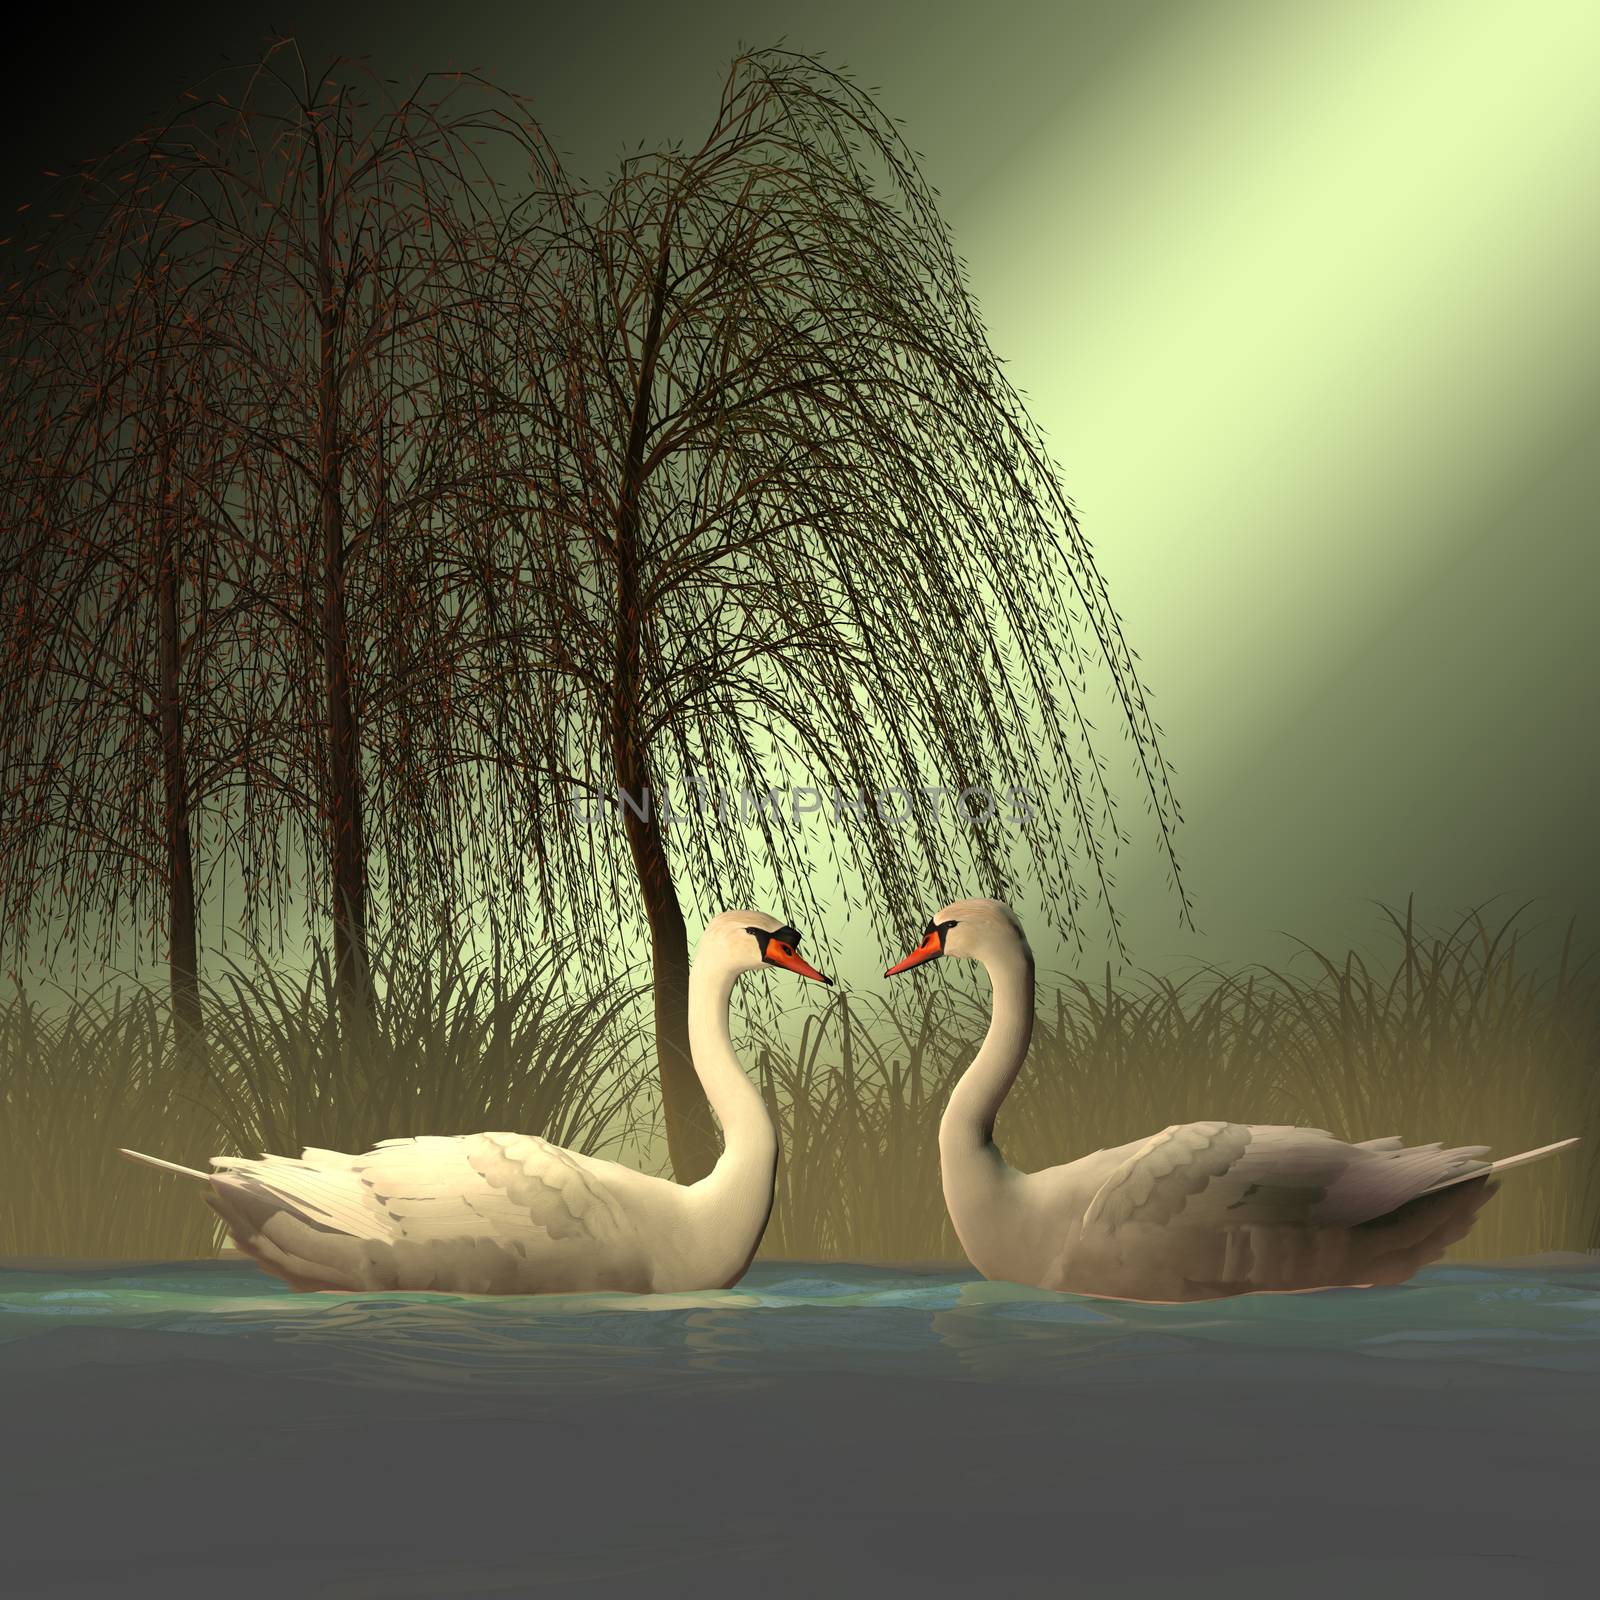 Two Mute Swans by Catmando